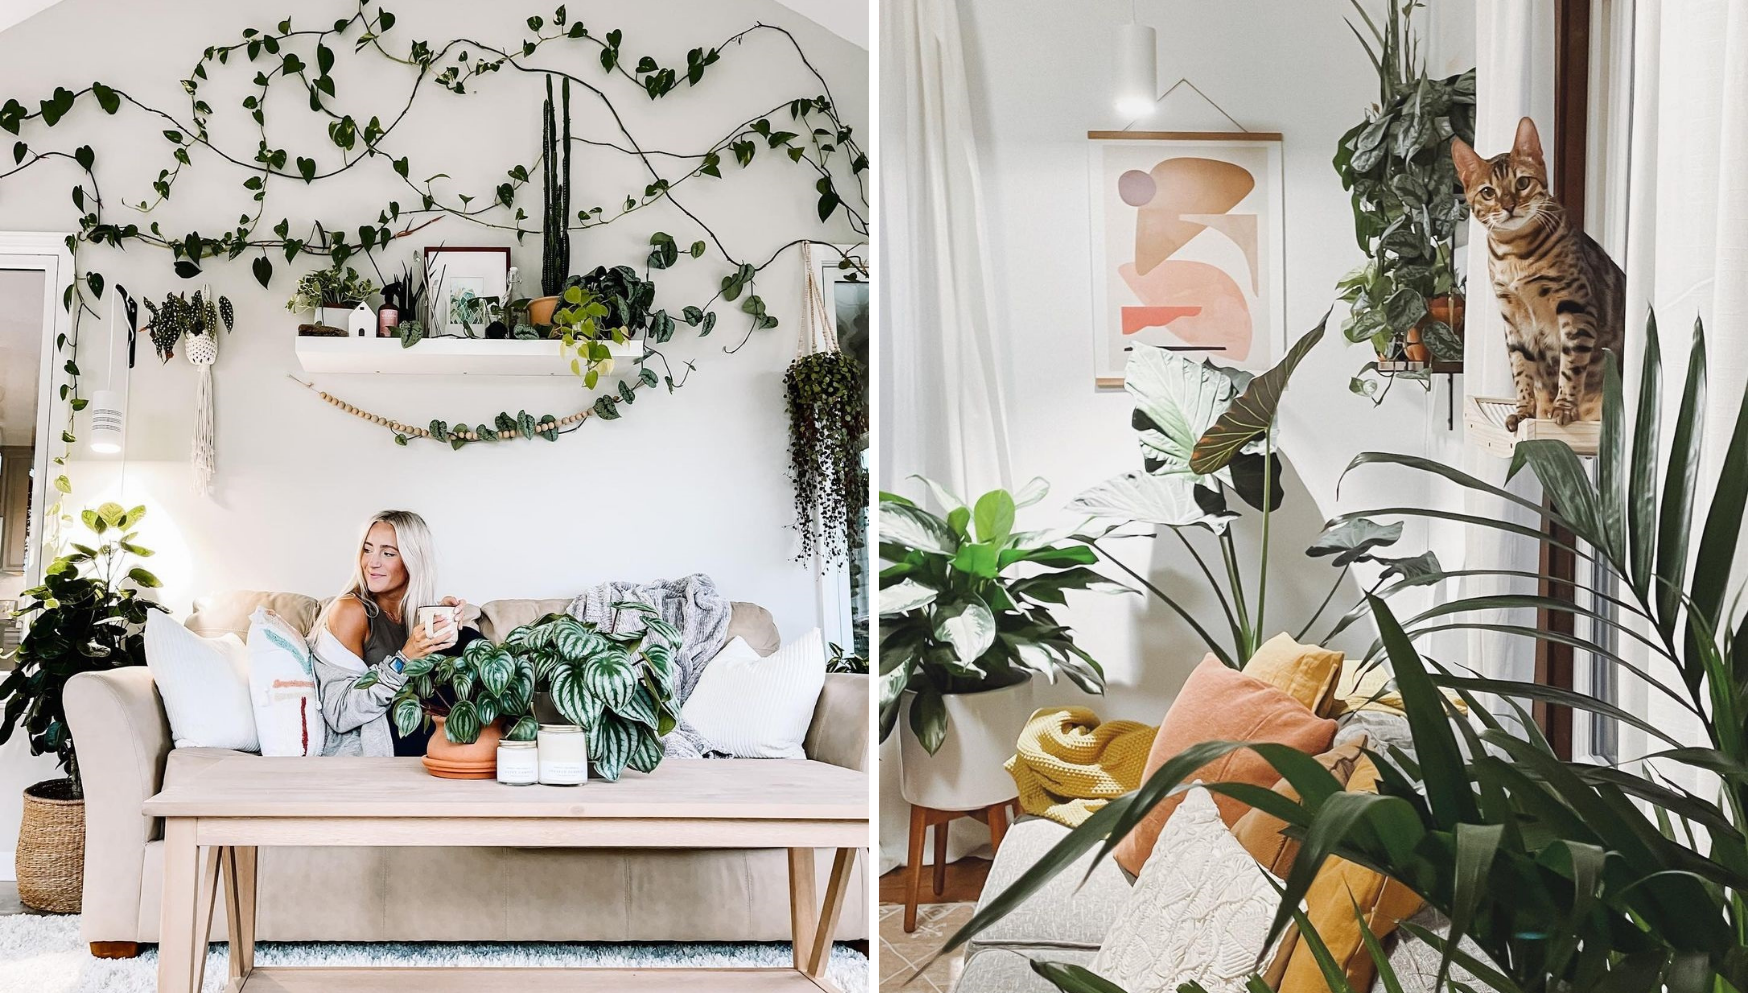 Grow lights as recommended by house plant enthusiasts — Green Rooms Market